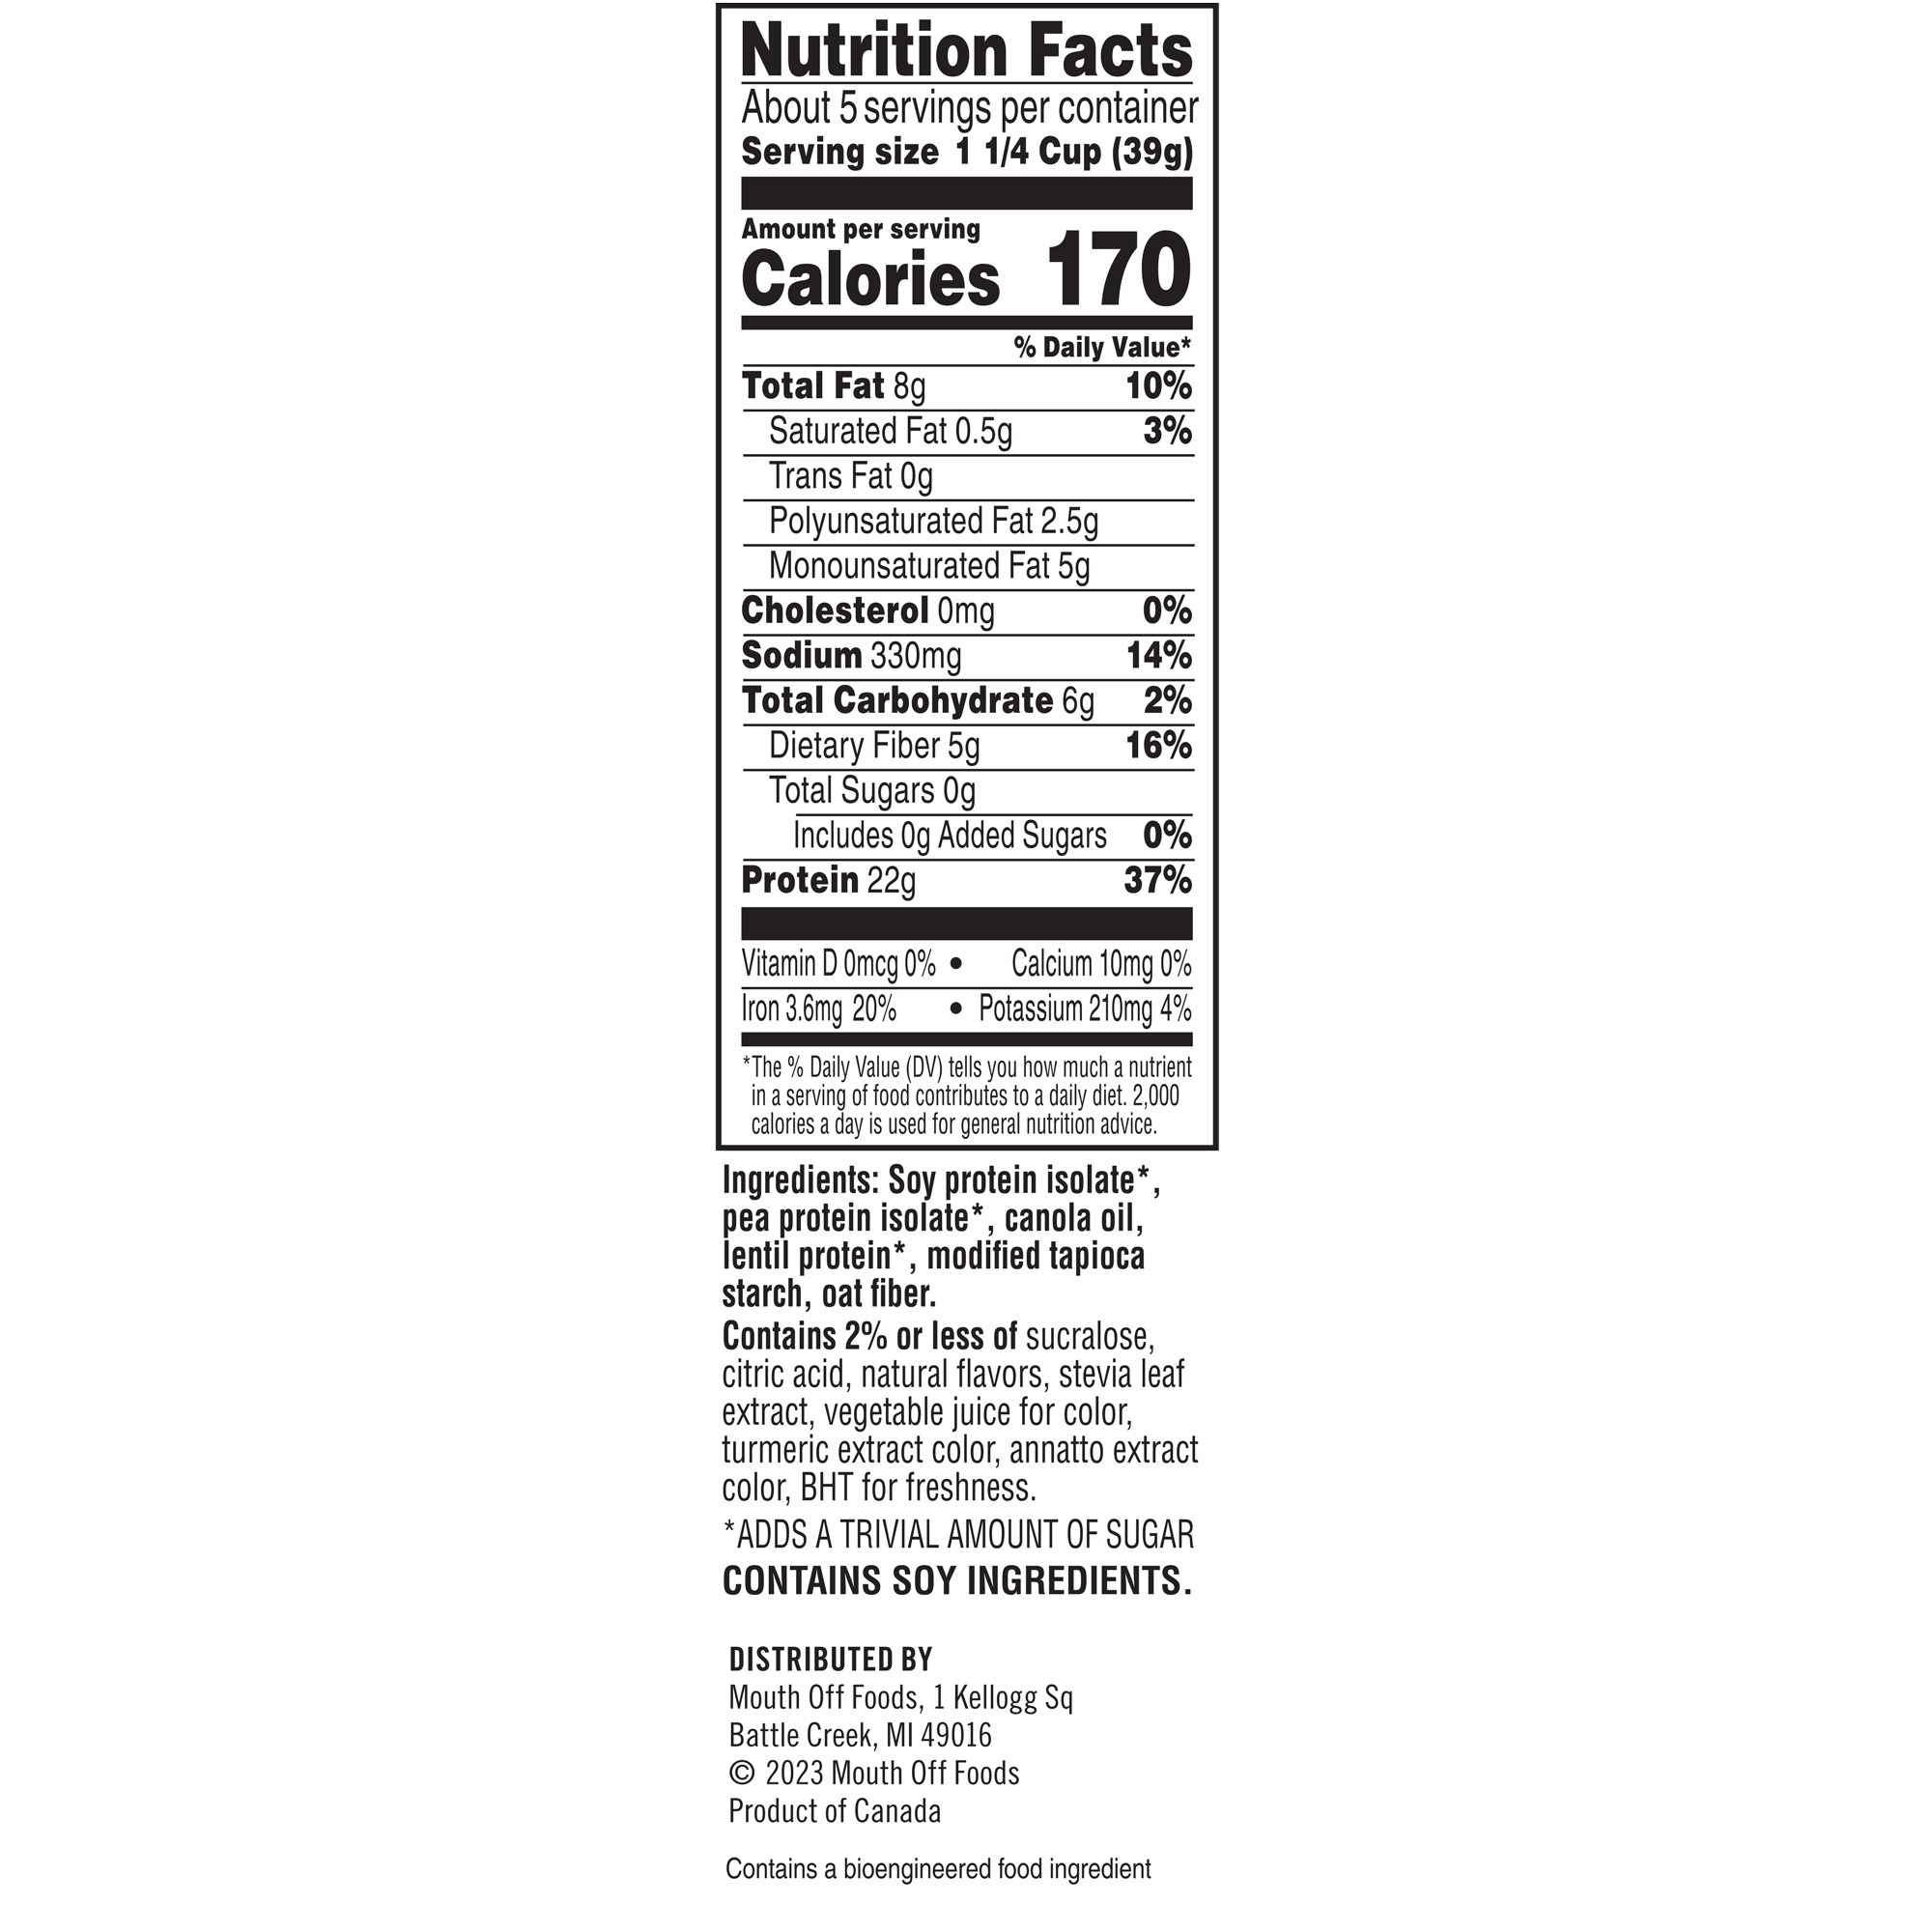 Mouth-Off-Boxes_Fruity-nutrition-label.png__PID:d91dc5b9-f4cc-4a0a-8abb-96beaeb62c10